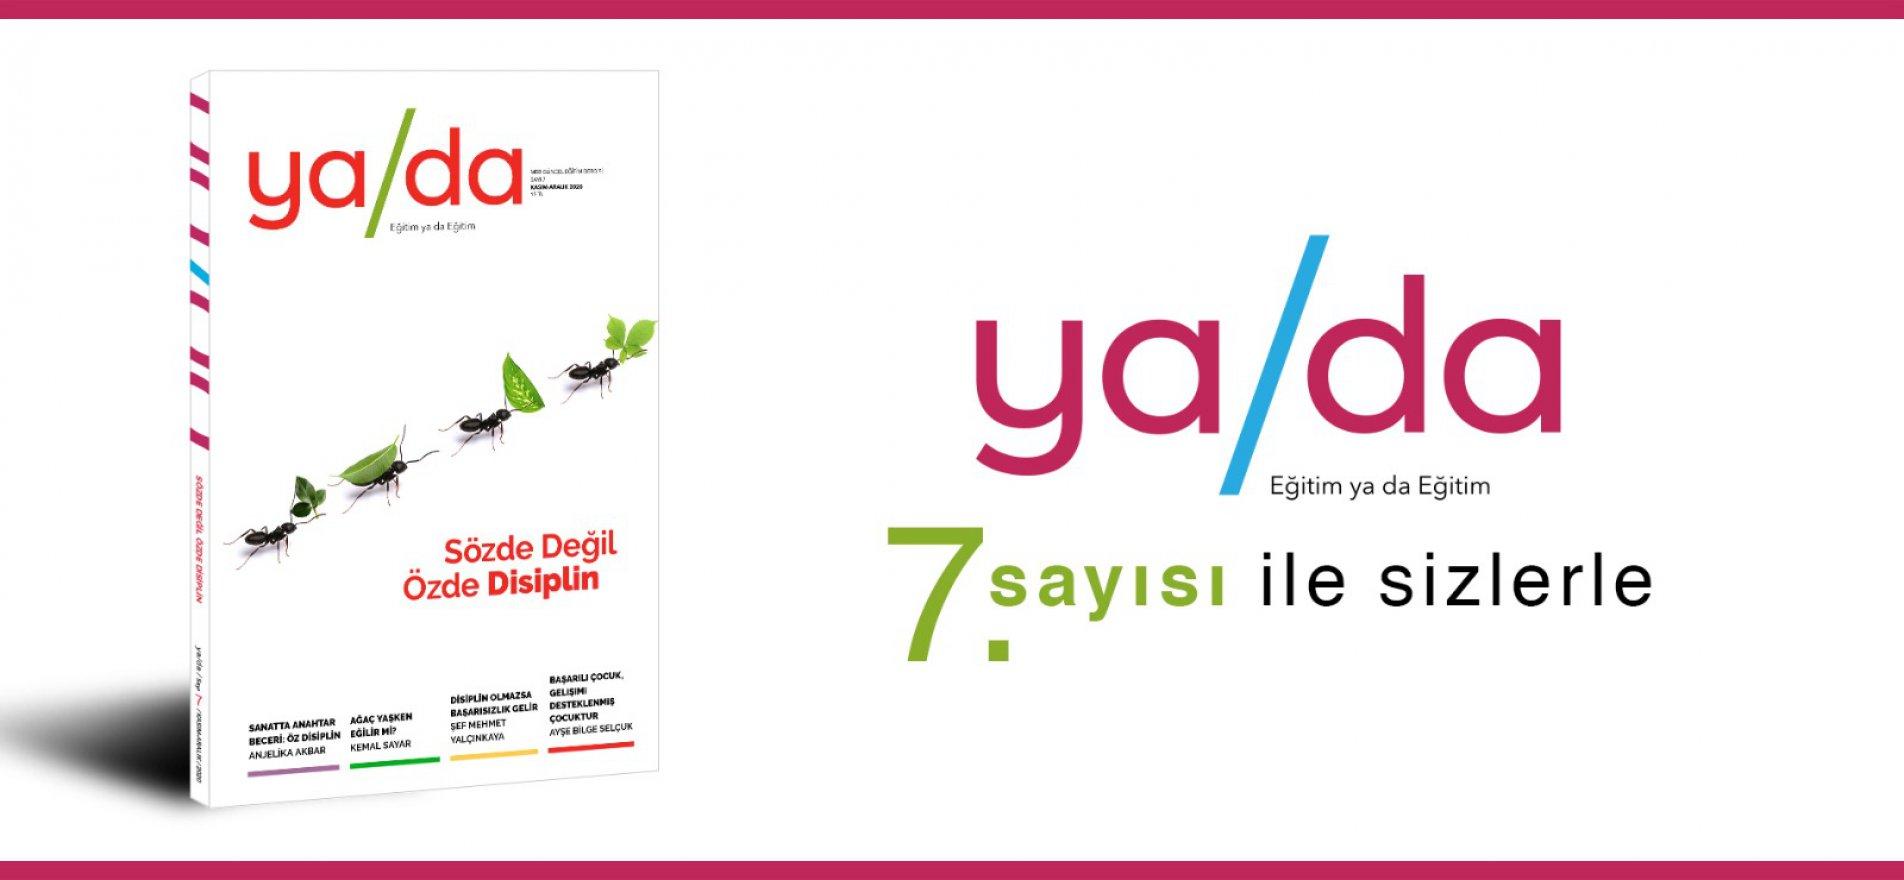 NEW ISSUE OF YA DA MAGAZINE SAYS DISCIPLINE NOT IN WORDS BUT IN DEEDS